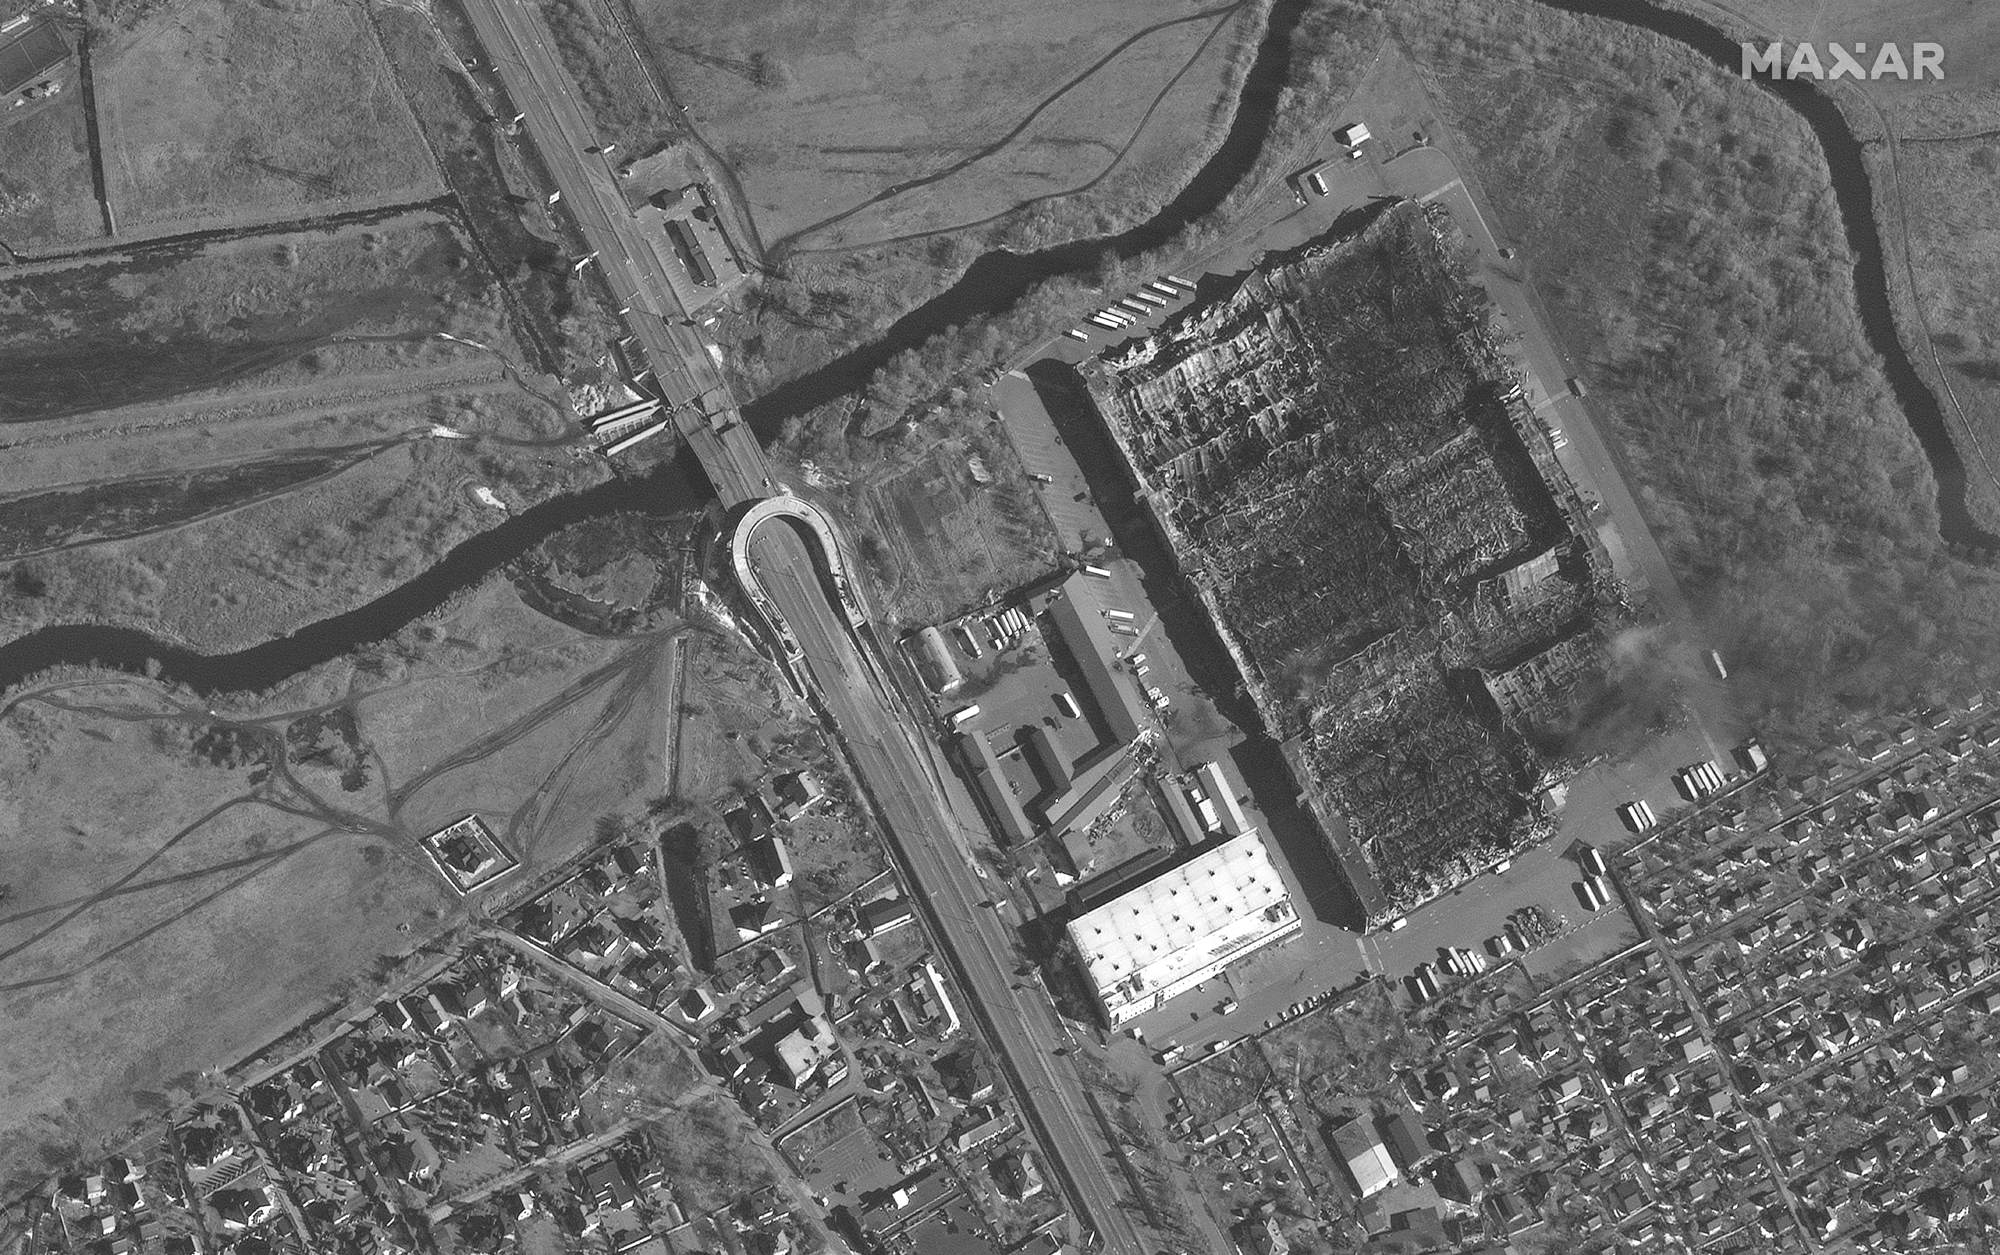 Destroyed warehouse buildings in Stoyanka, western Kyiv region are visible in this Maxar satellite image taken on March 10, 2022.